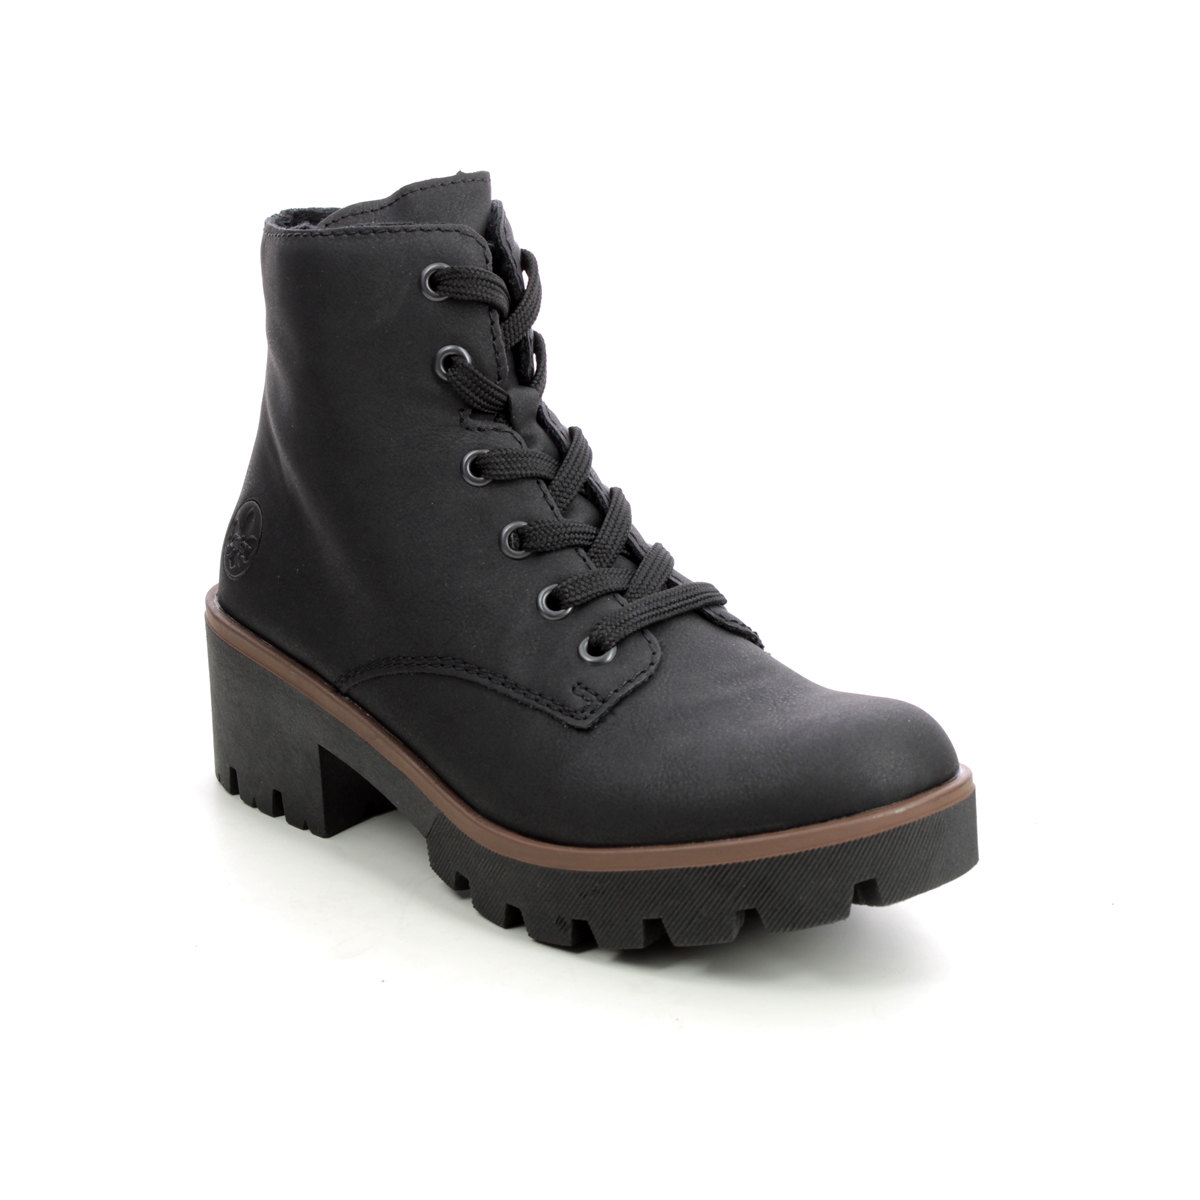 Rieker 79240-00 Black Womens Lace Up Boots in a Plain Man-made in Size 36